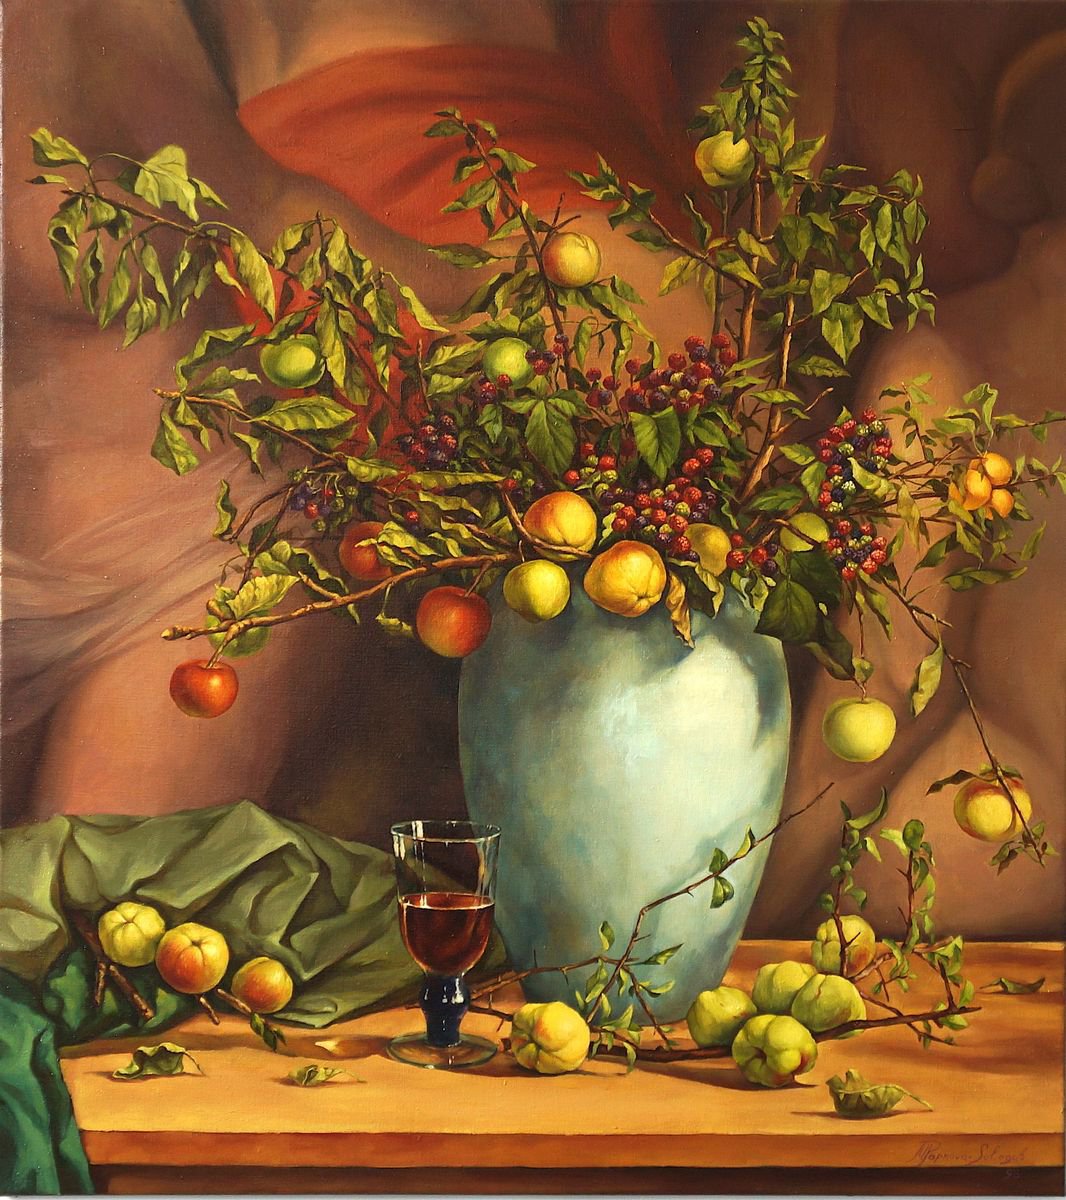 Still life with apples and painting by Marina Popkova-Sologub